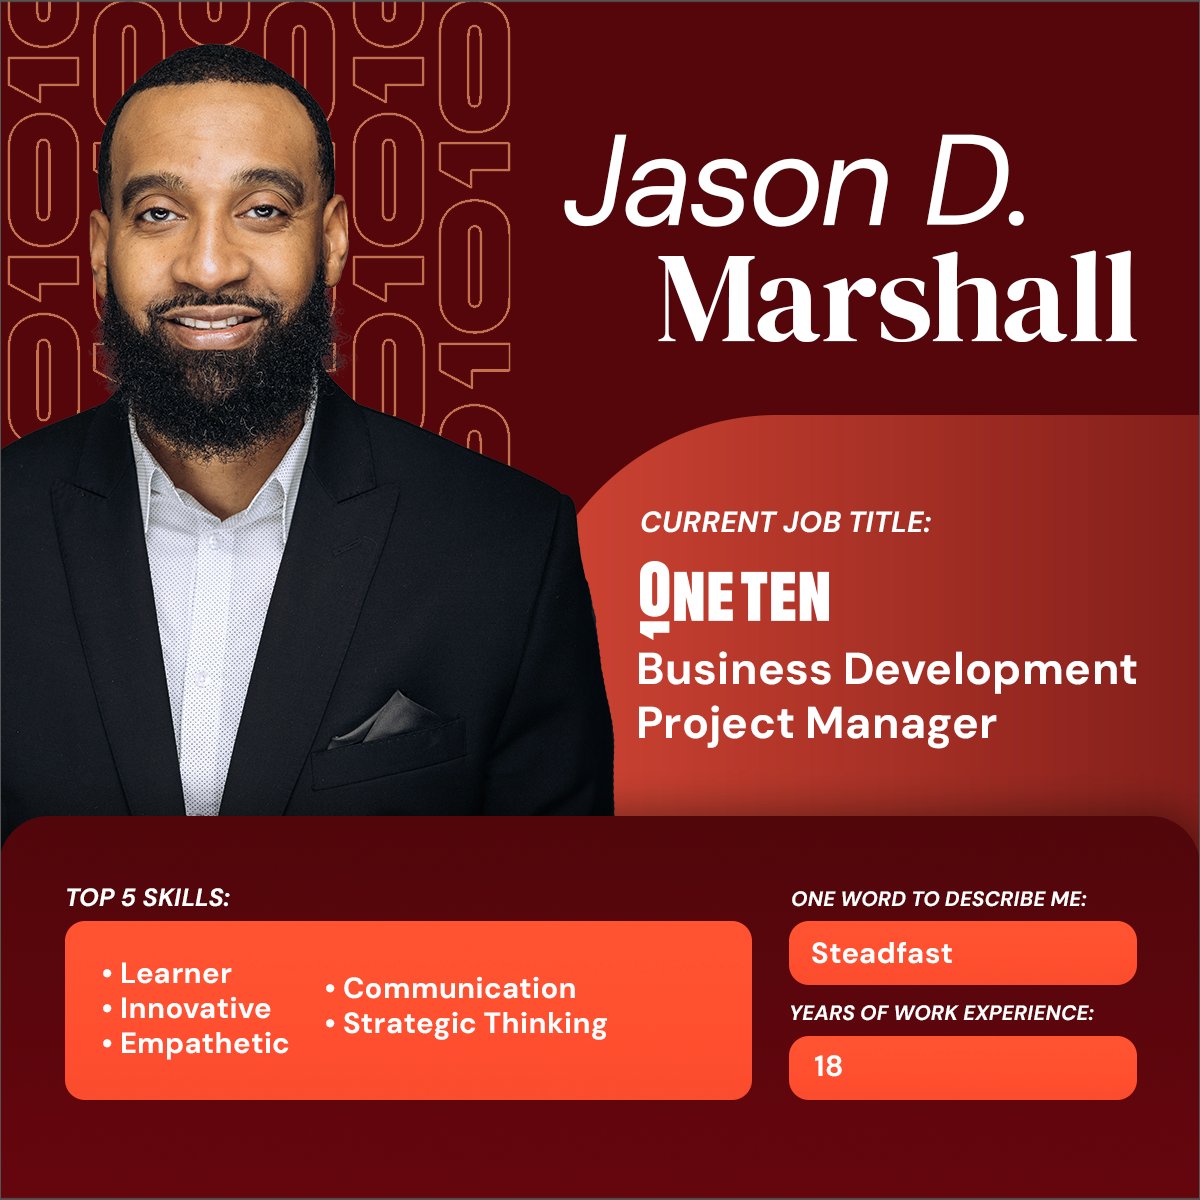 Meet Jason D. Marshall, our Business Development Project Manager at OneTen. Over a career spanning more than 18 years, Jason acquired invaluable skills honed through hands-on job experiences. We are honored to have him on our team. #HireSkillsFirst #OneTenTalent